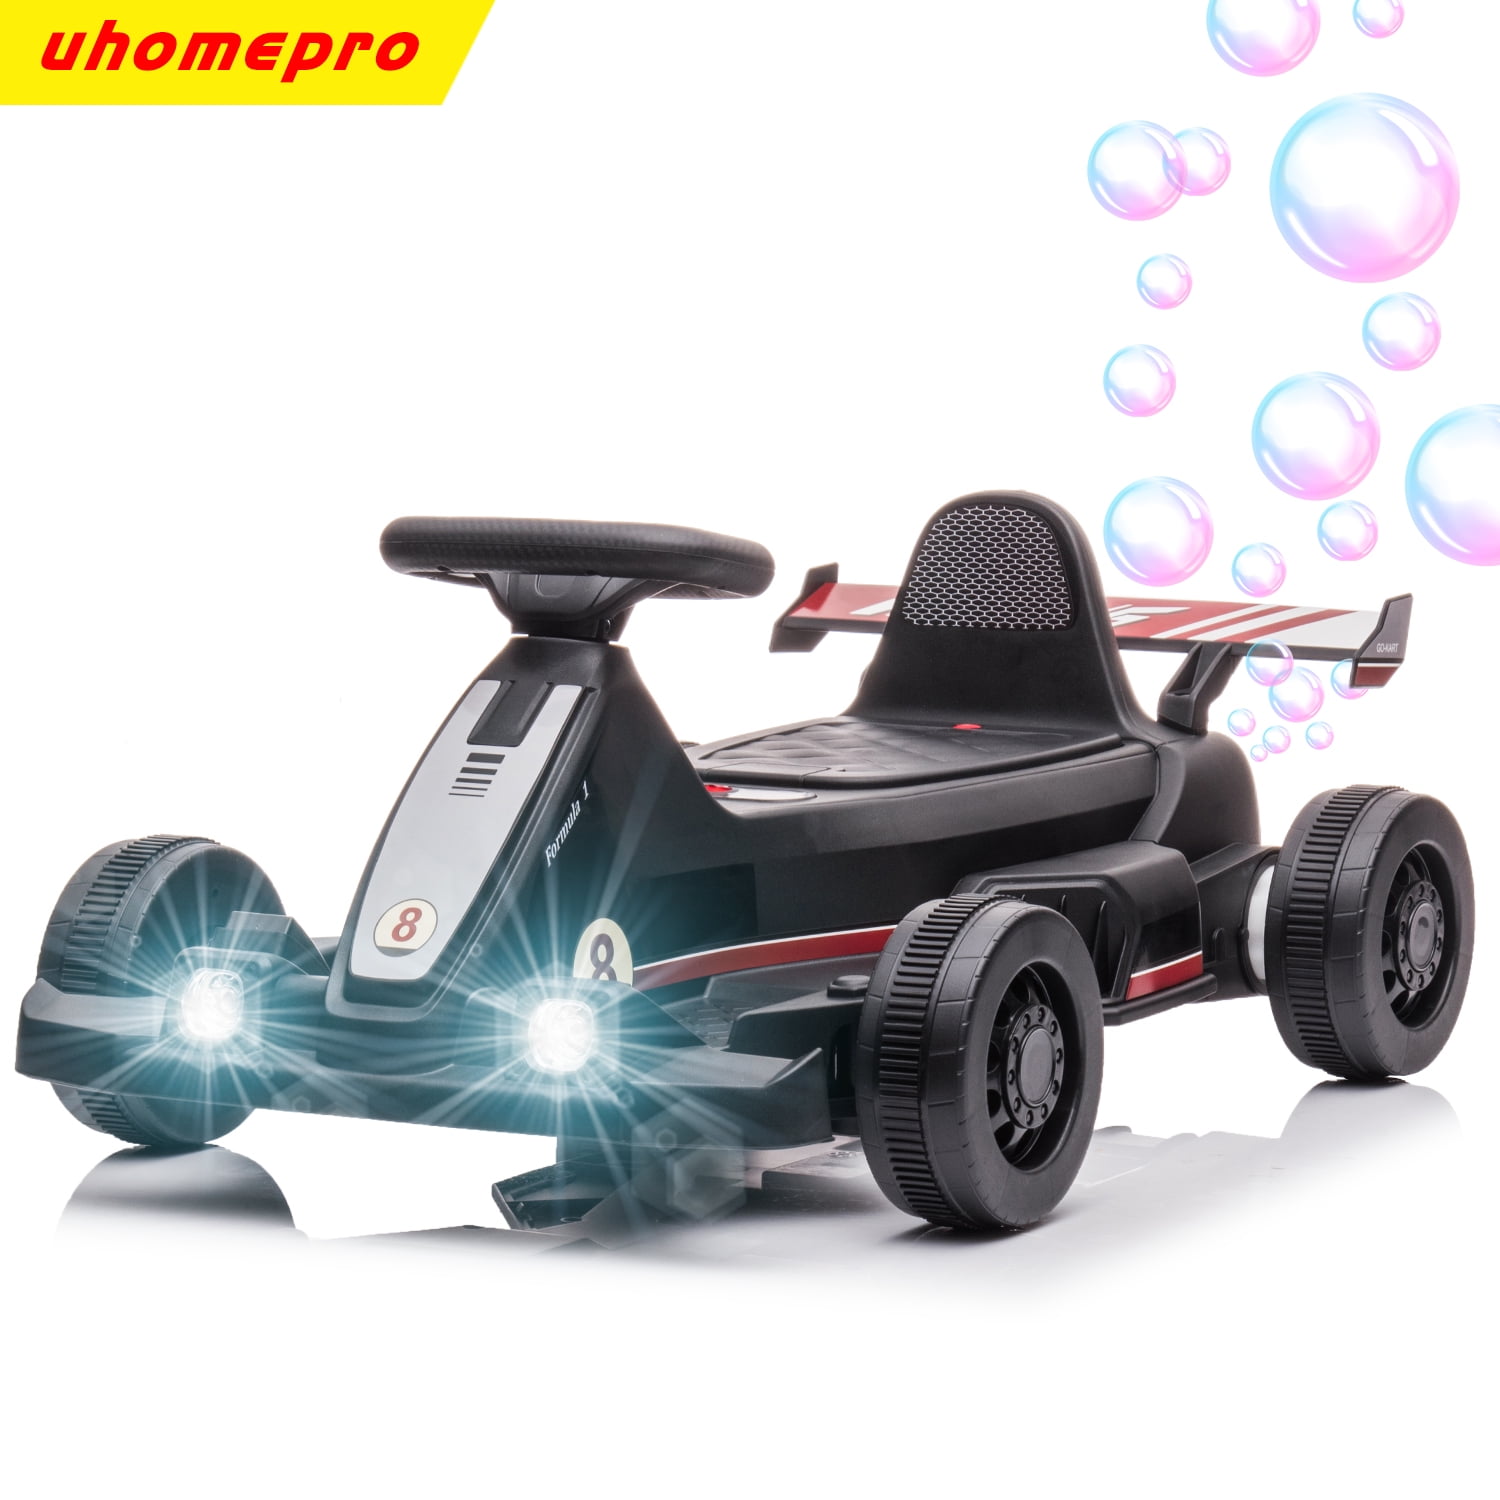 Implications height Greengrocer uhomepro Electric Go Kart 6V Powered Ride On with Make Bubbles Function,  Black - Walmart.com